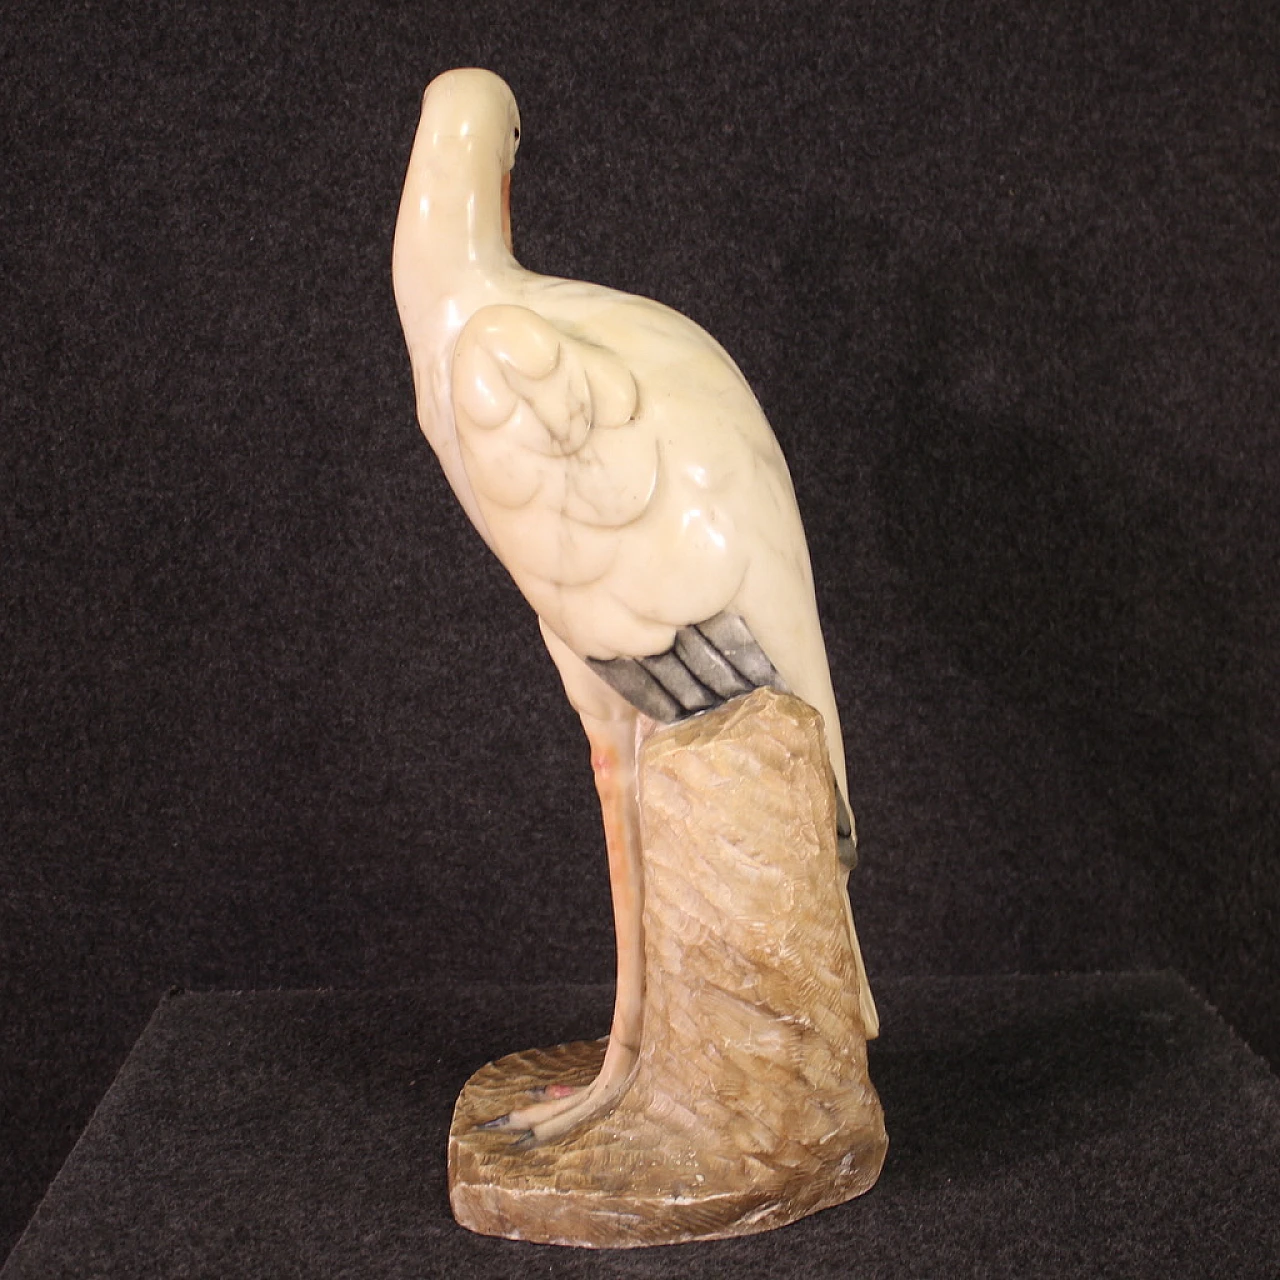 Heron, chiseled and patinated alabaster sculpture 8